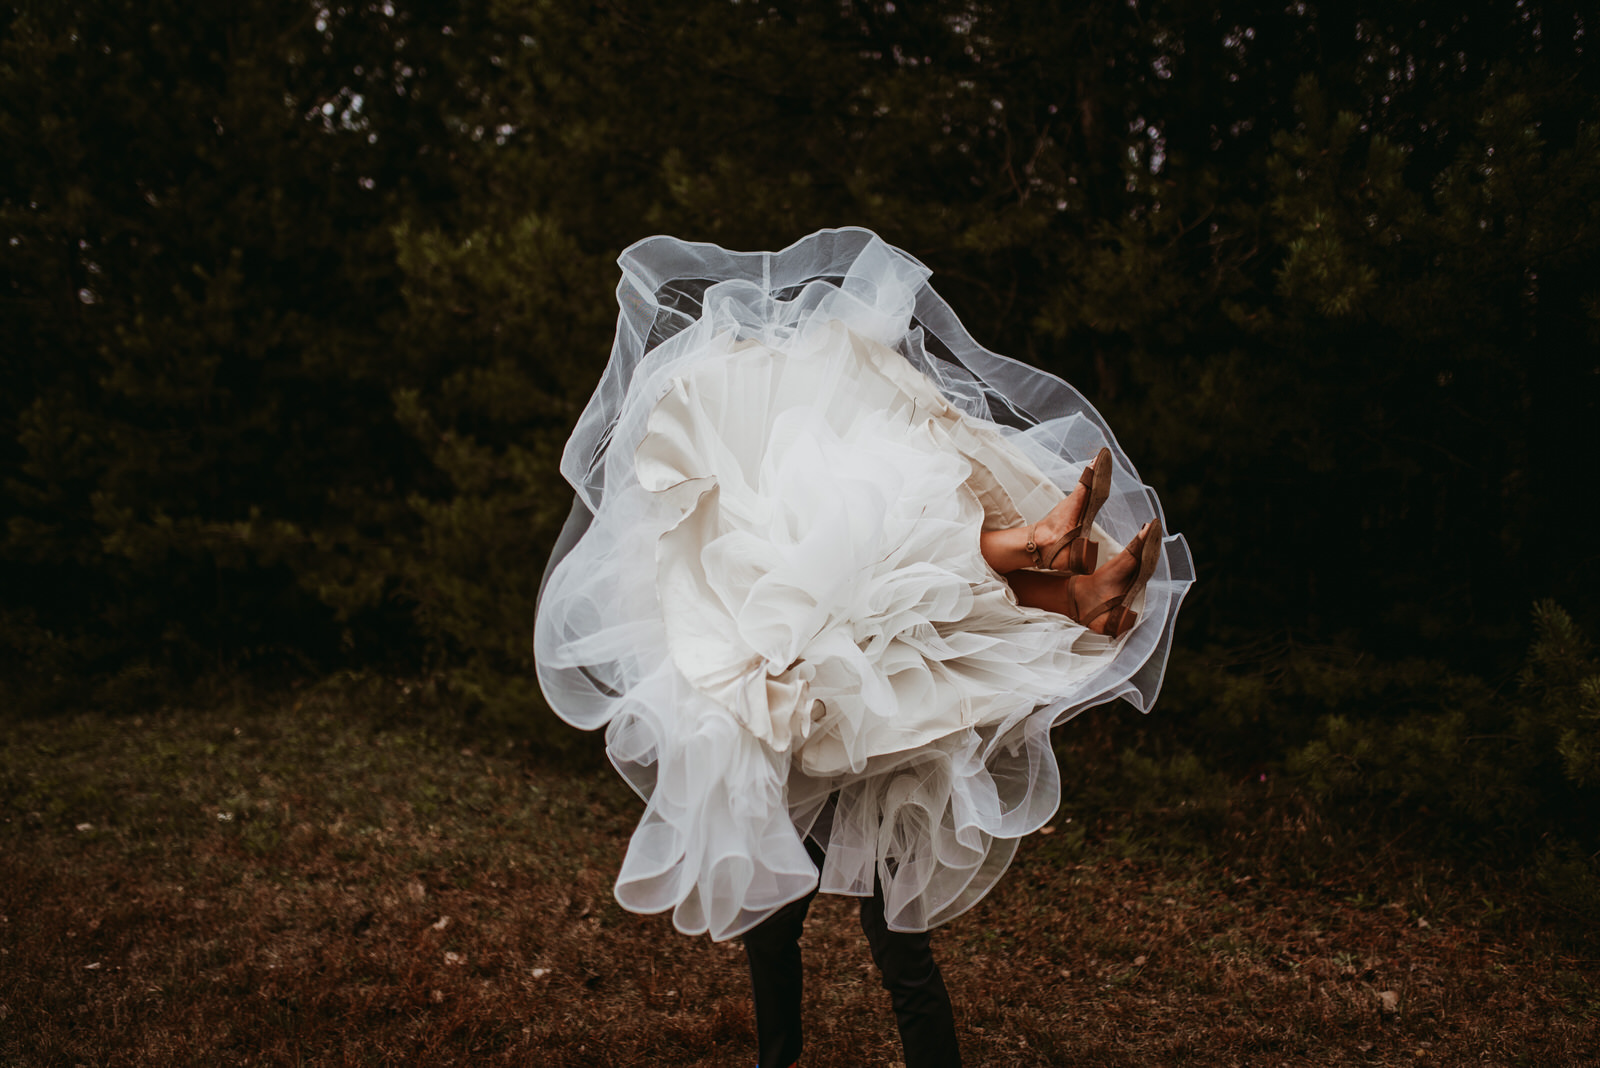 the most epic and cute BHLDN wedding dress, moody photography, Chicago wedding photography - The Adamkovi